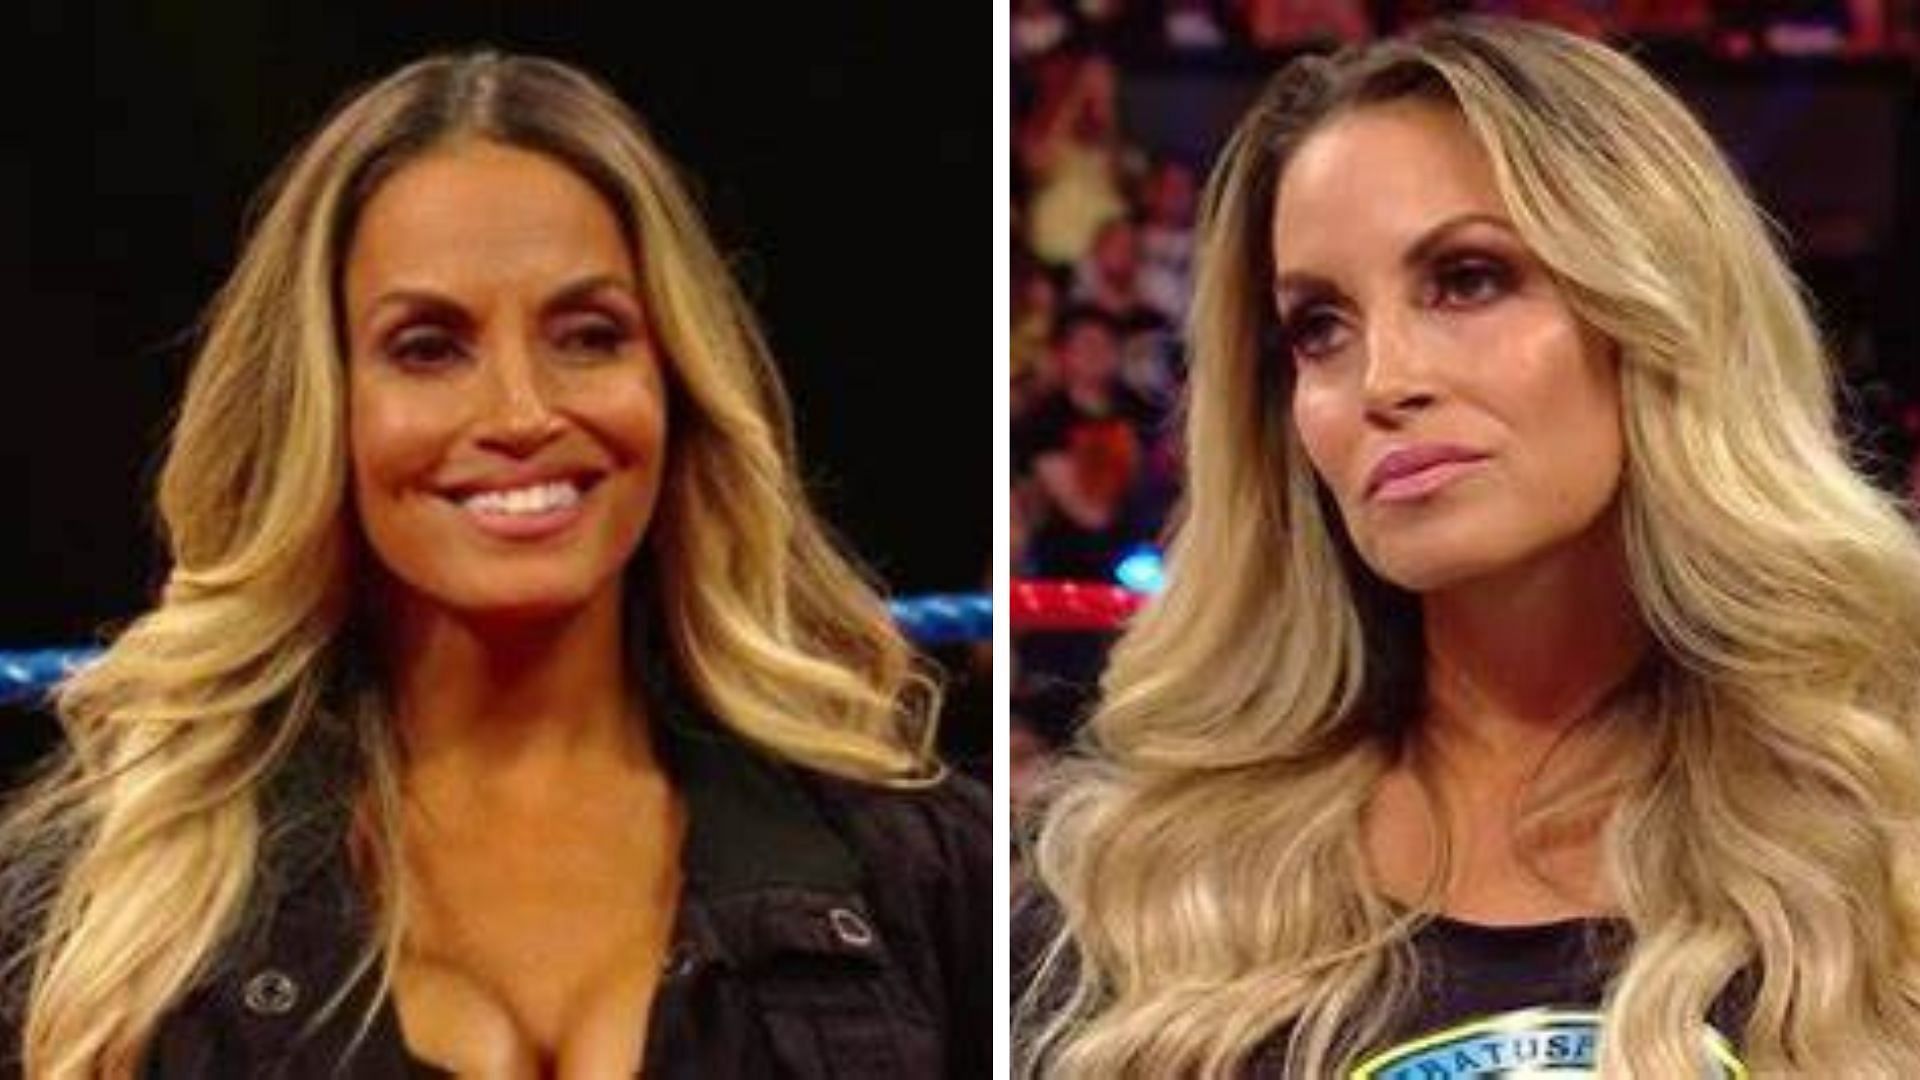 Trish Stratus is a WWE Hall of Famer